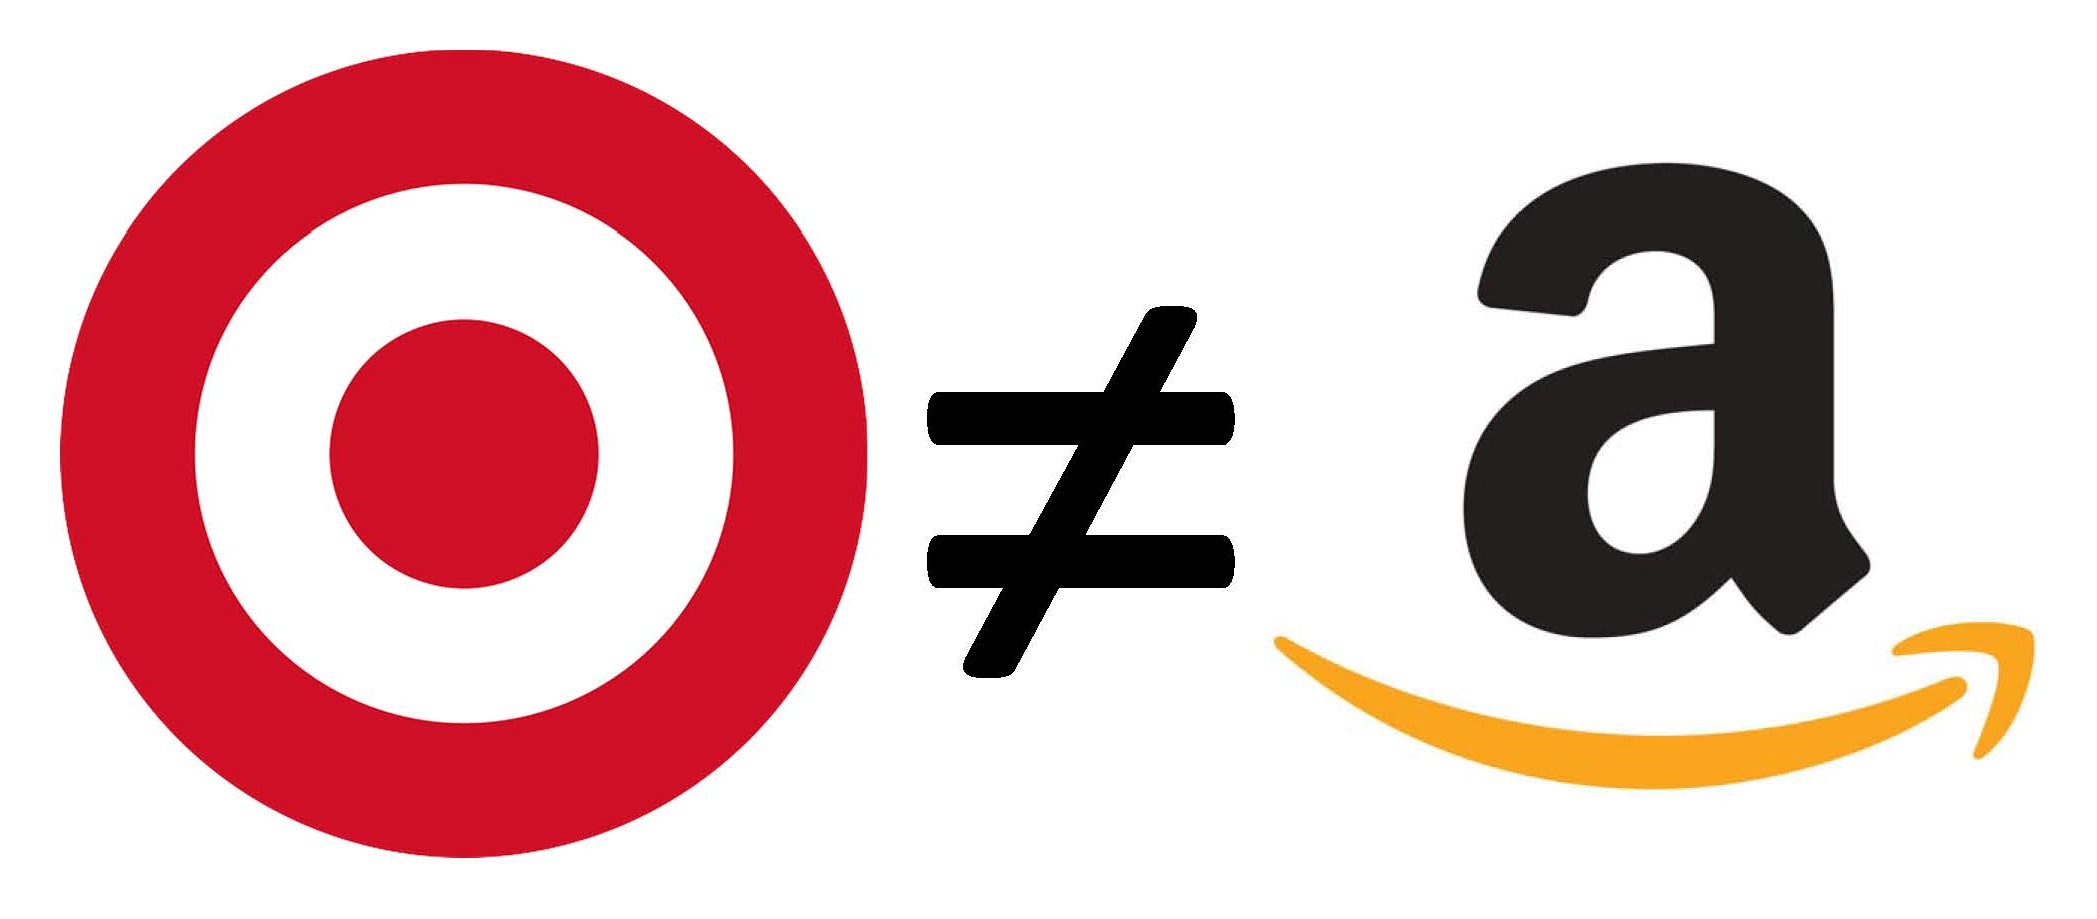 Target Isn’t Amazon—And That’s A Good Thing